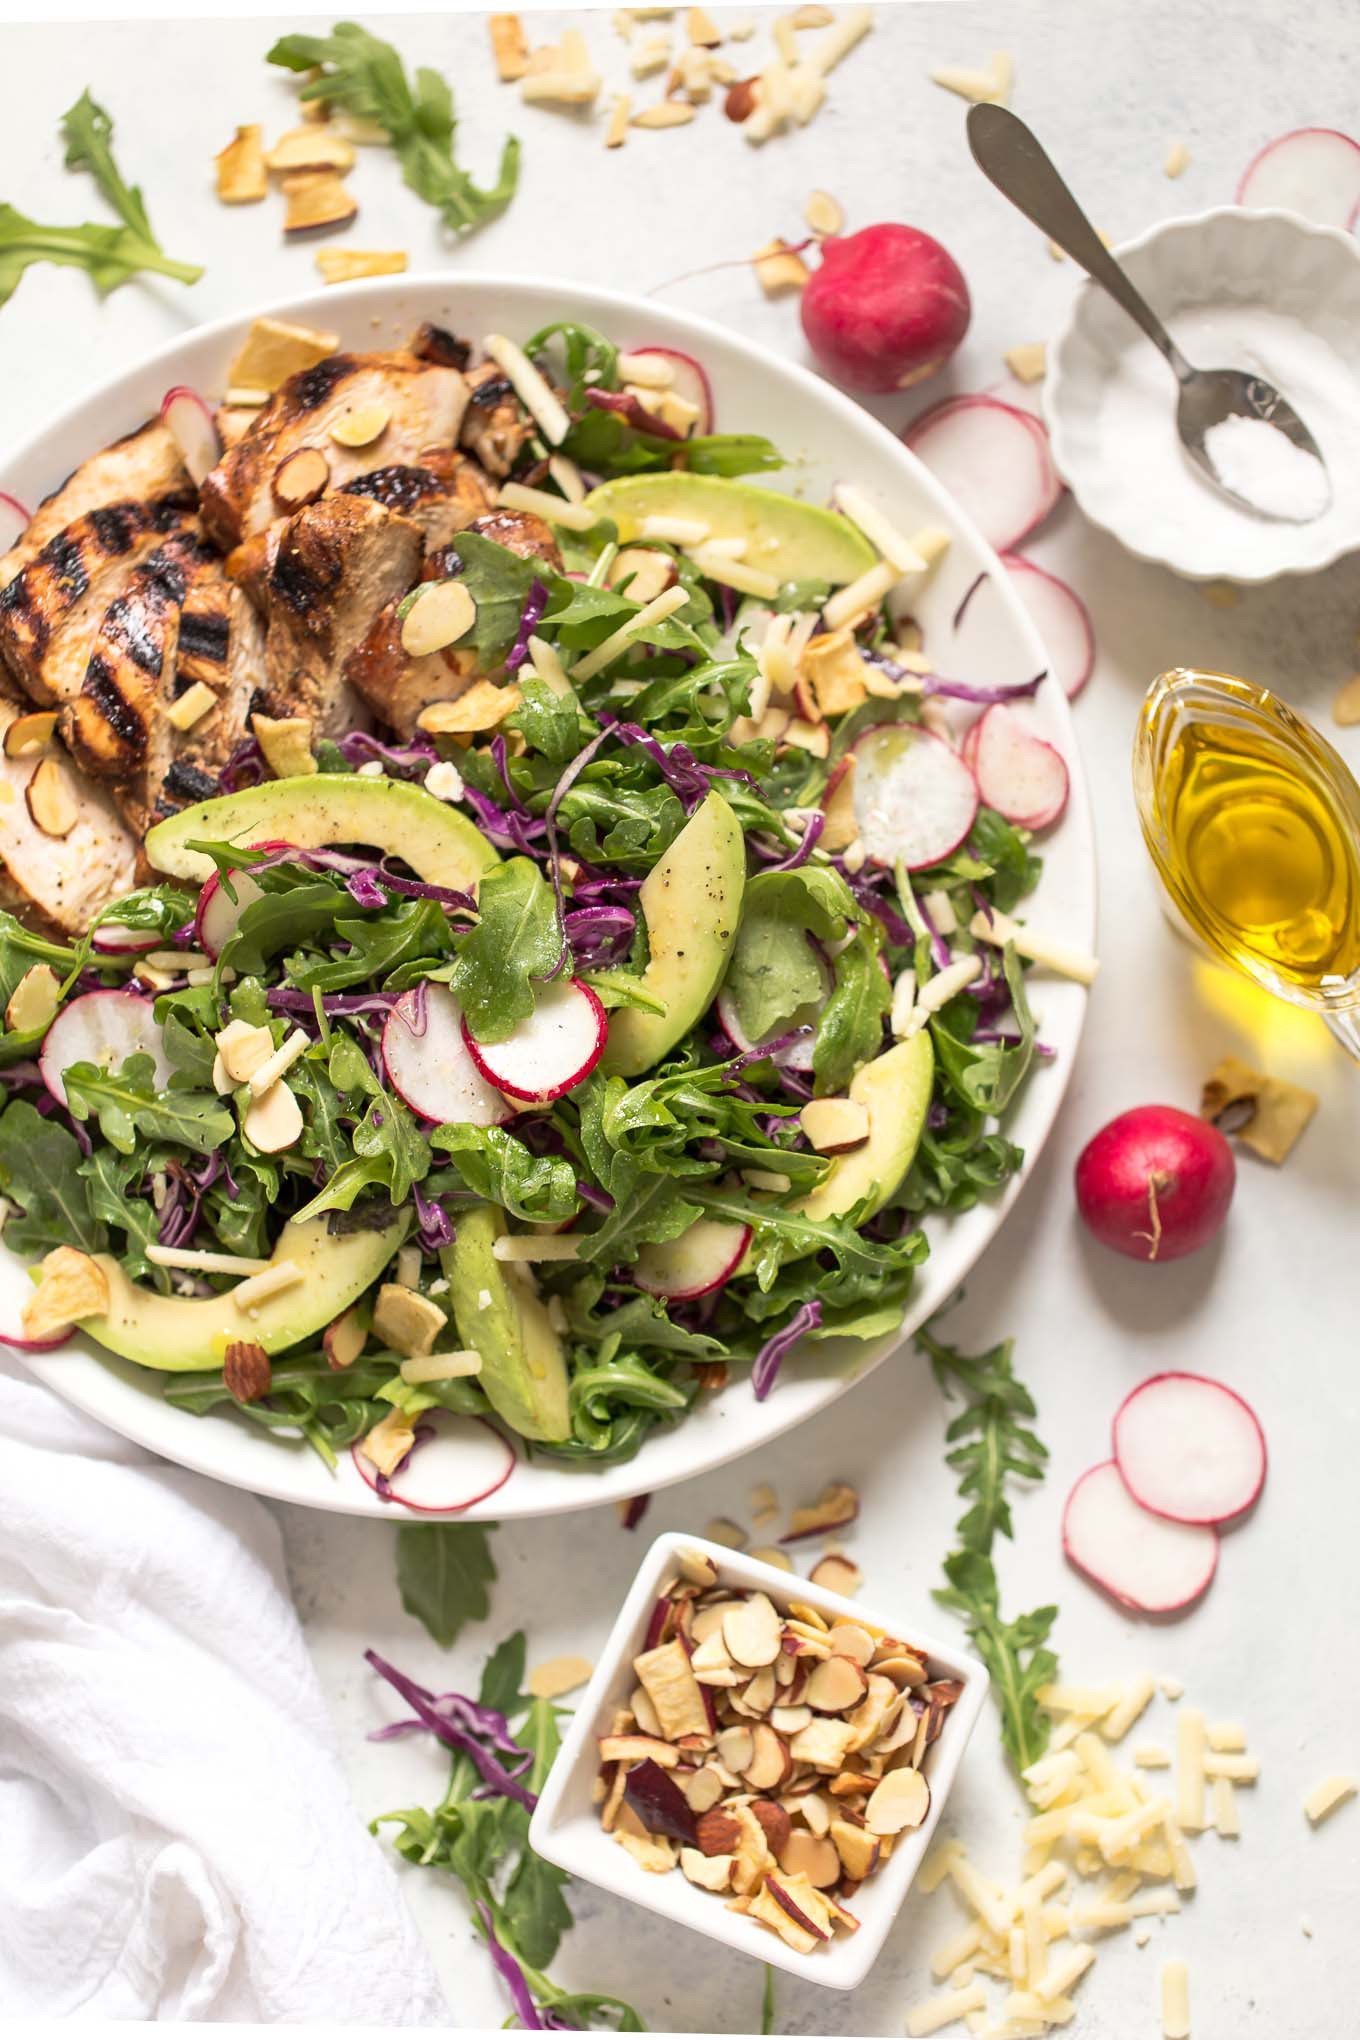 Chicken Salad Recipe With Apples
 Balsamic Chicken Salad with Apples and White Cheddar DeLallo